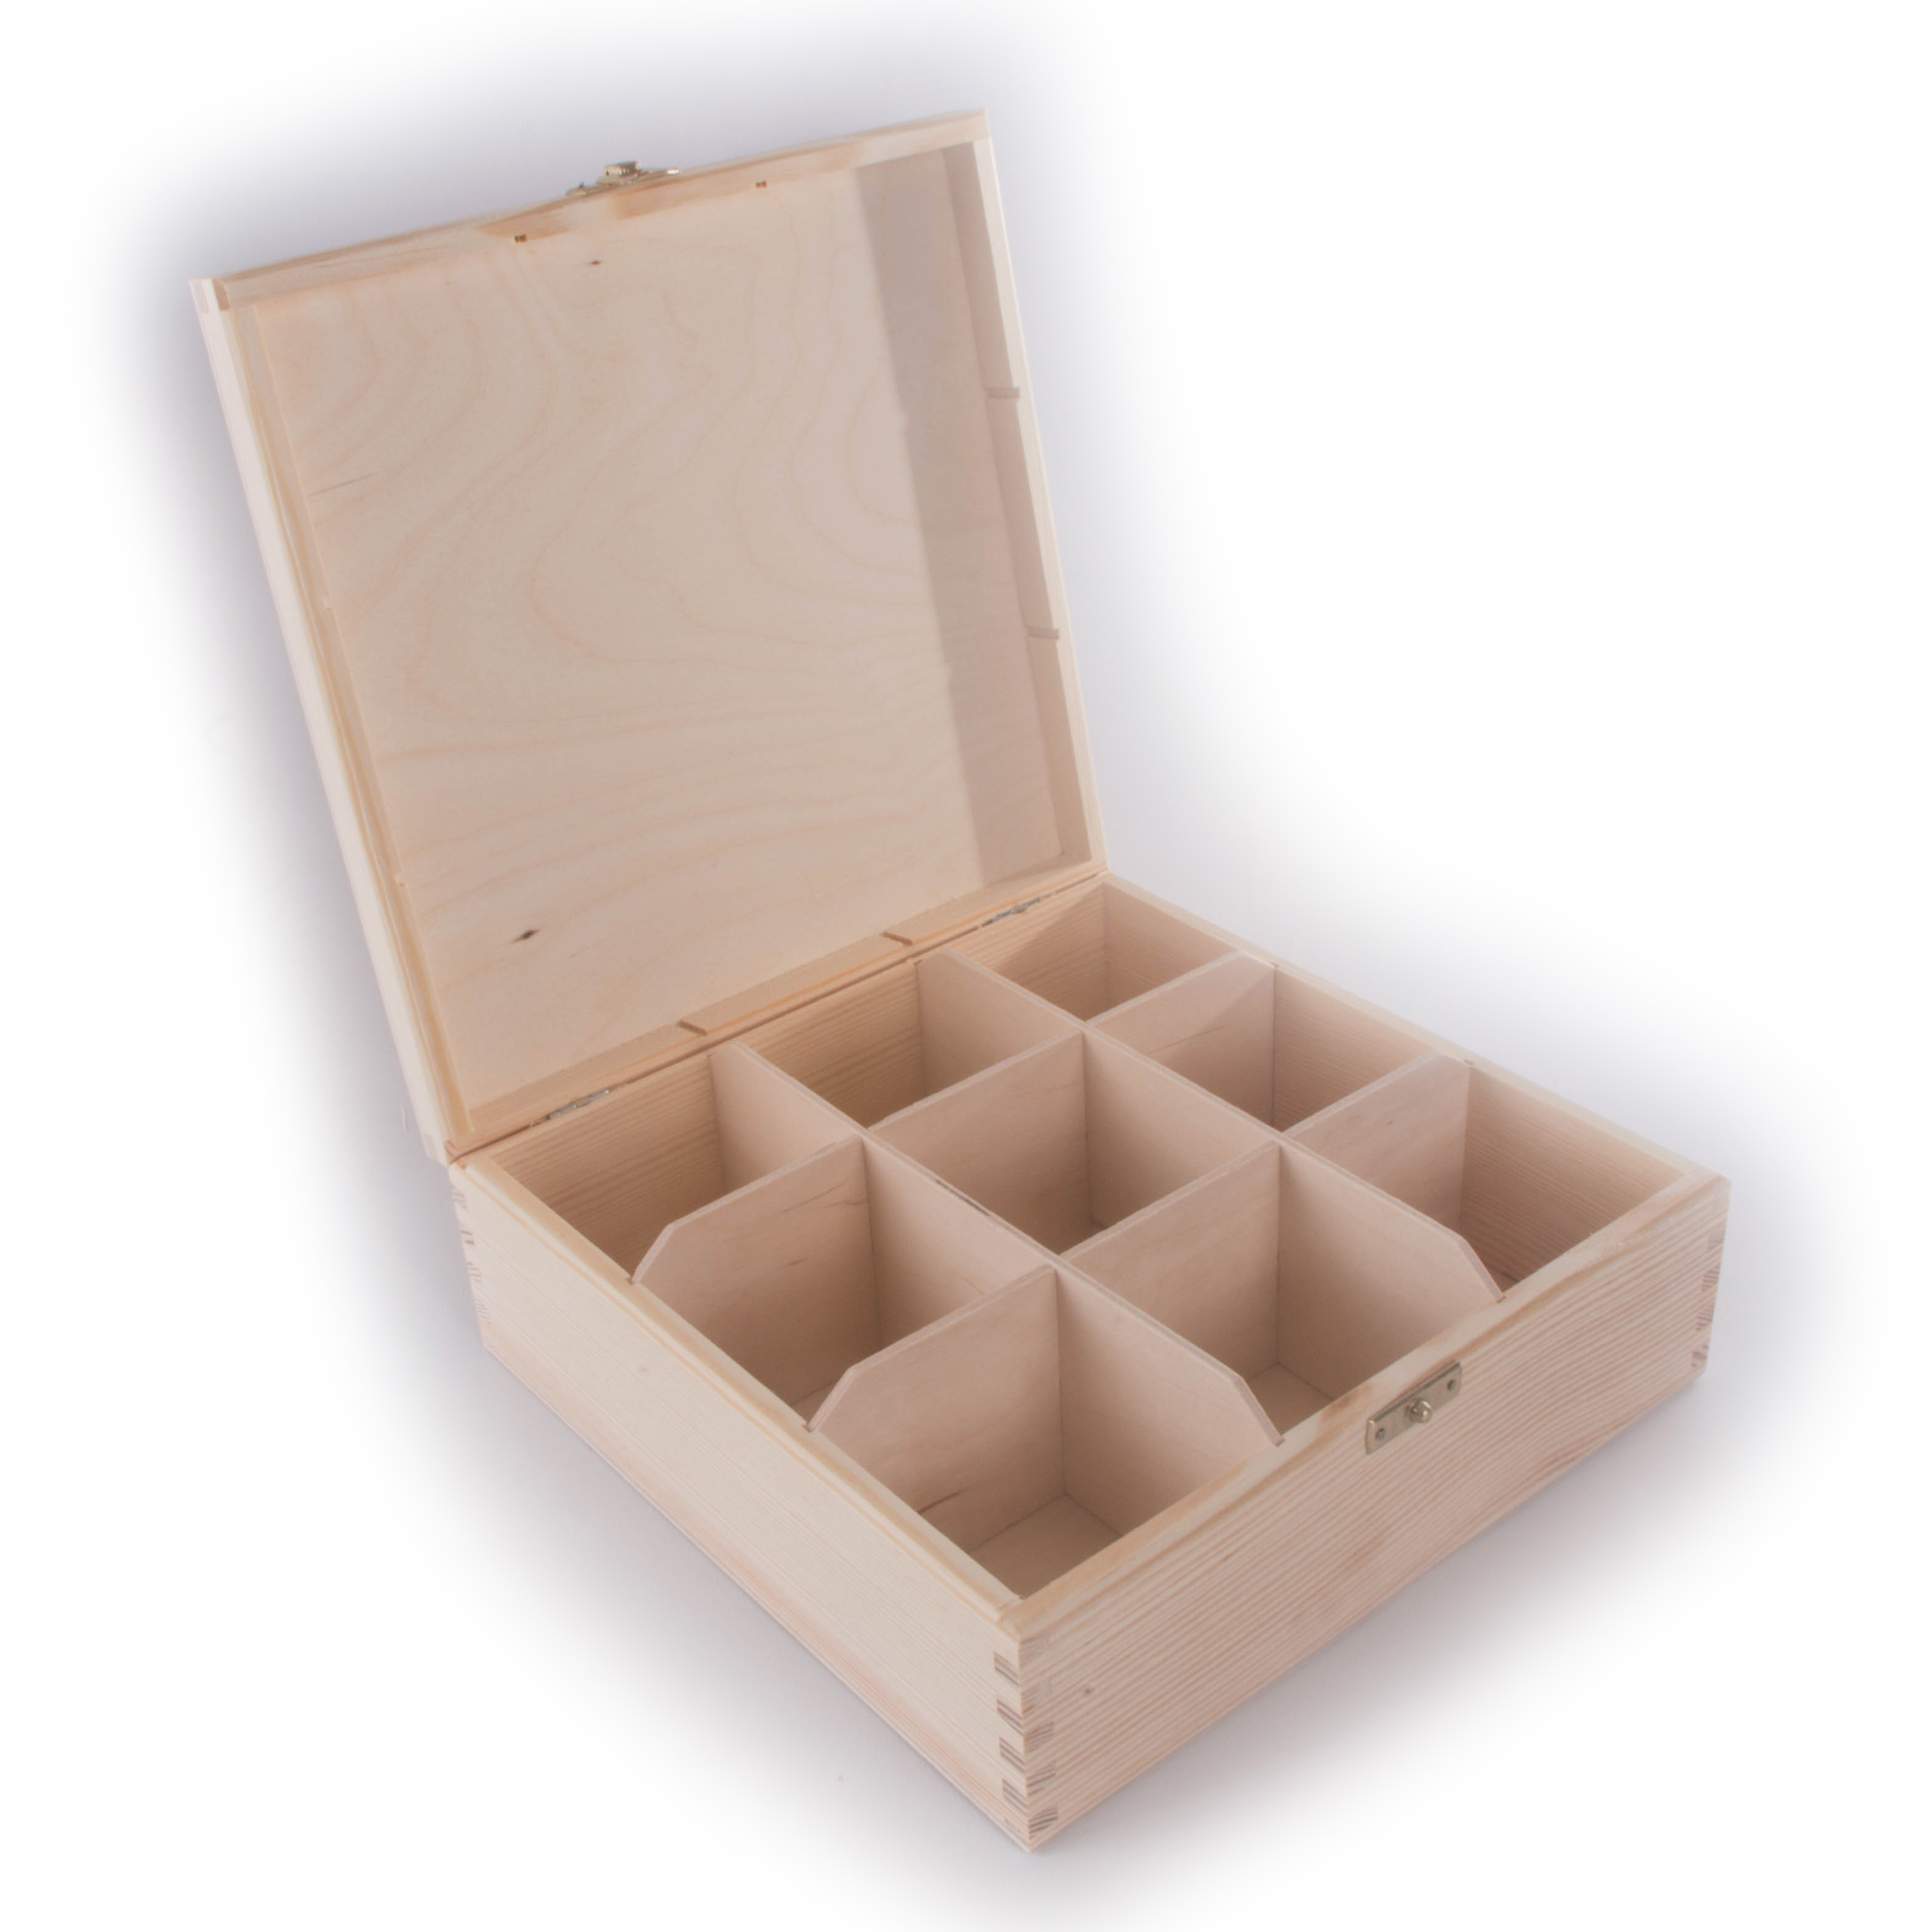 Wooden Storage Box With Lid Clasp & 9 Sections Compartments/ Keepsake